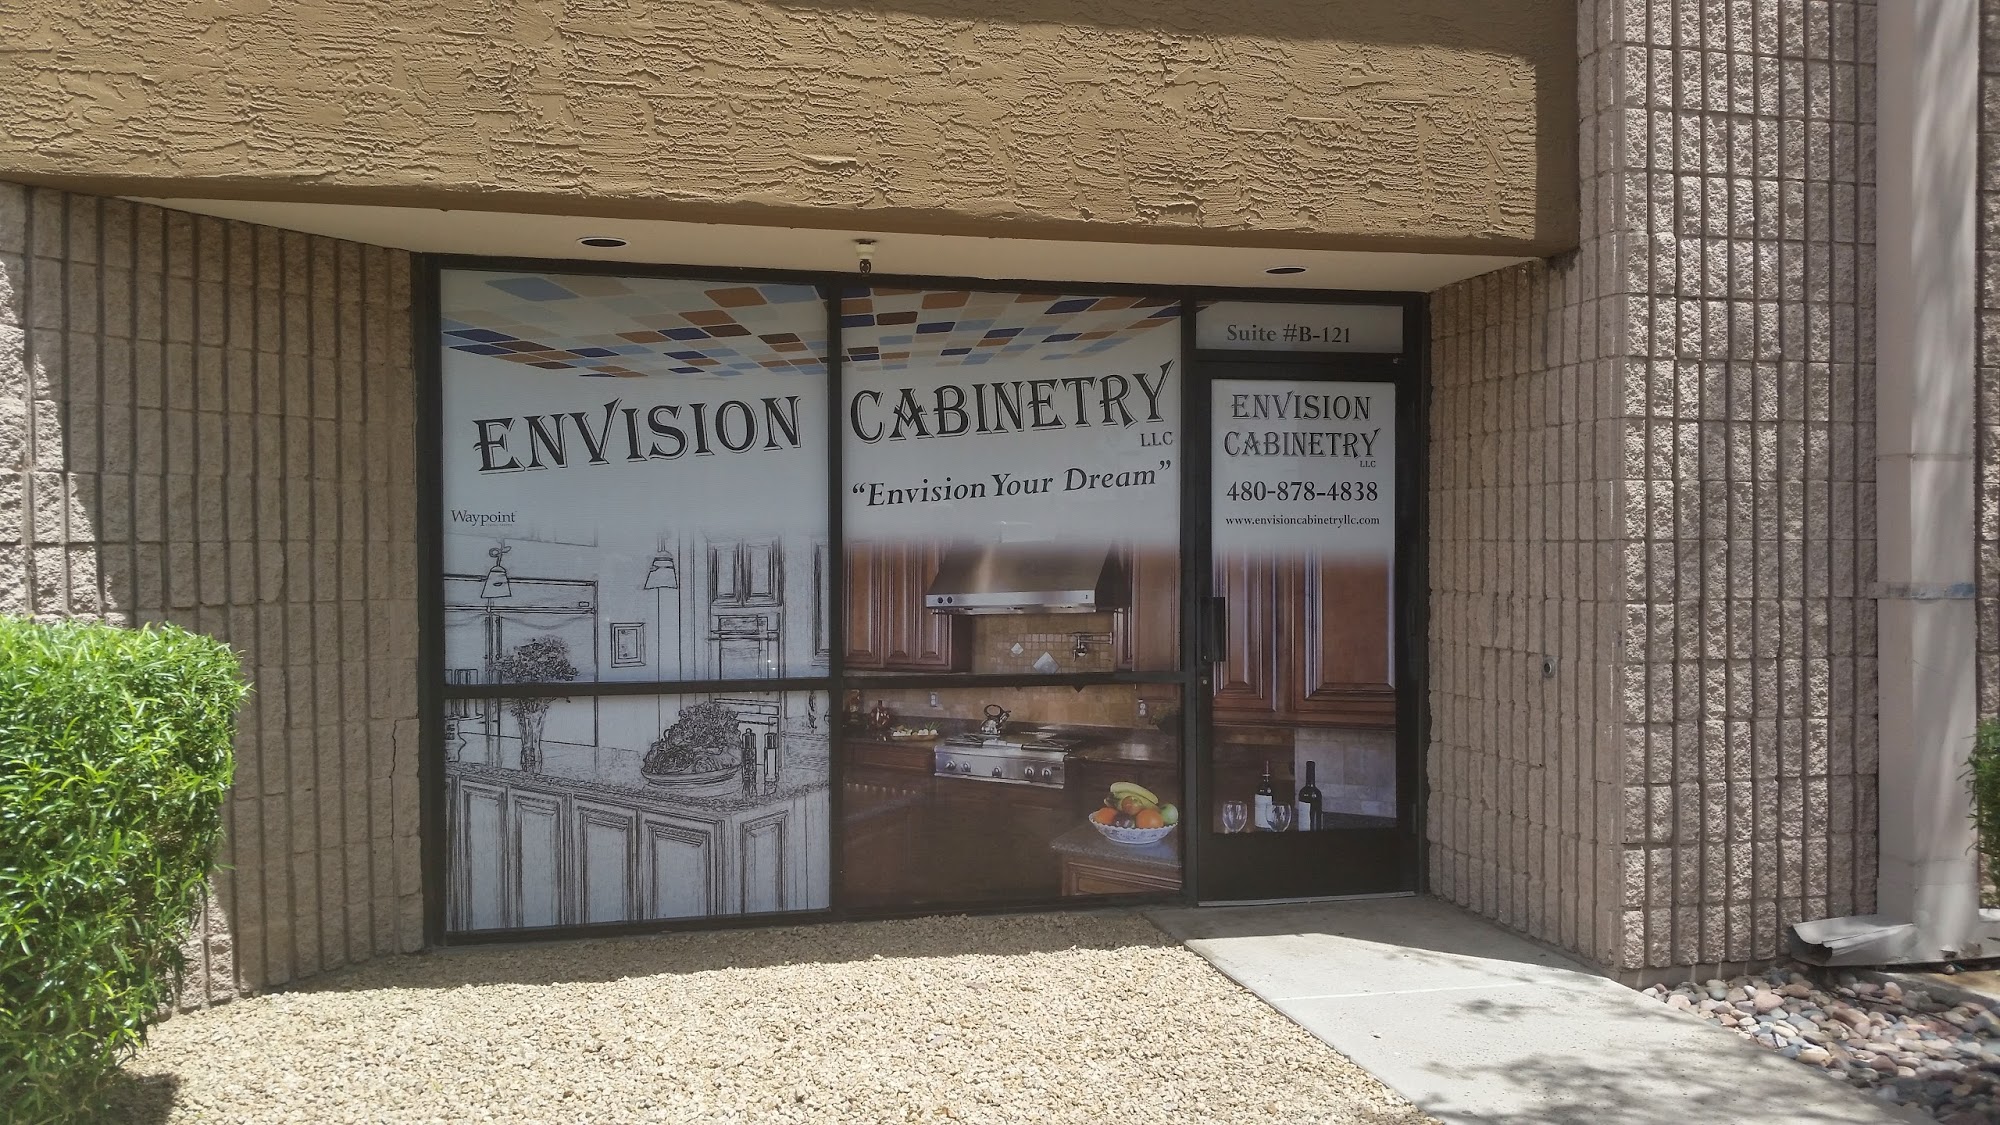 Envision Cabinetry LLC